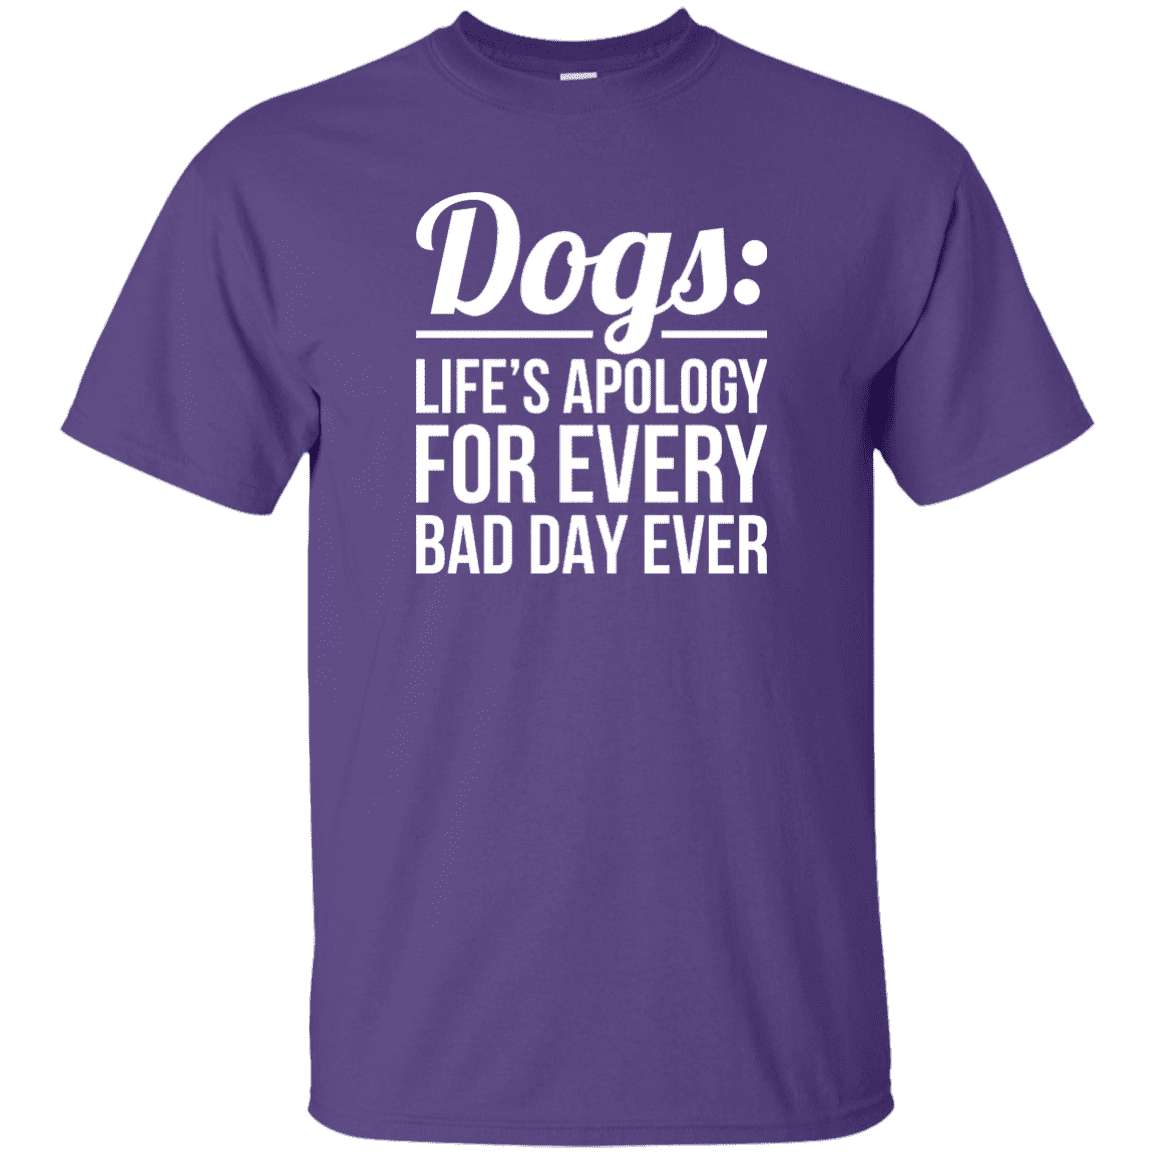 Dogs Life's Apology - T Shirt.